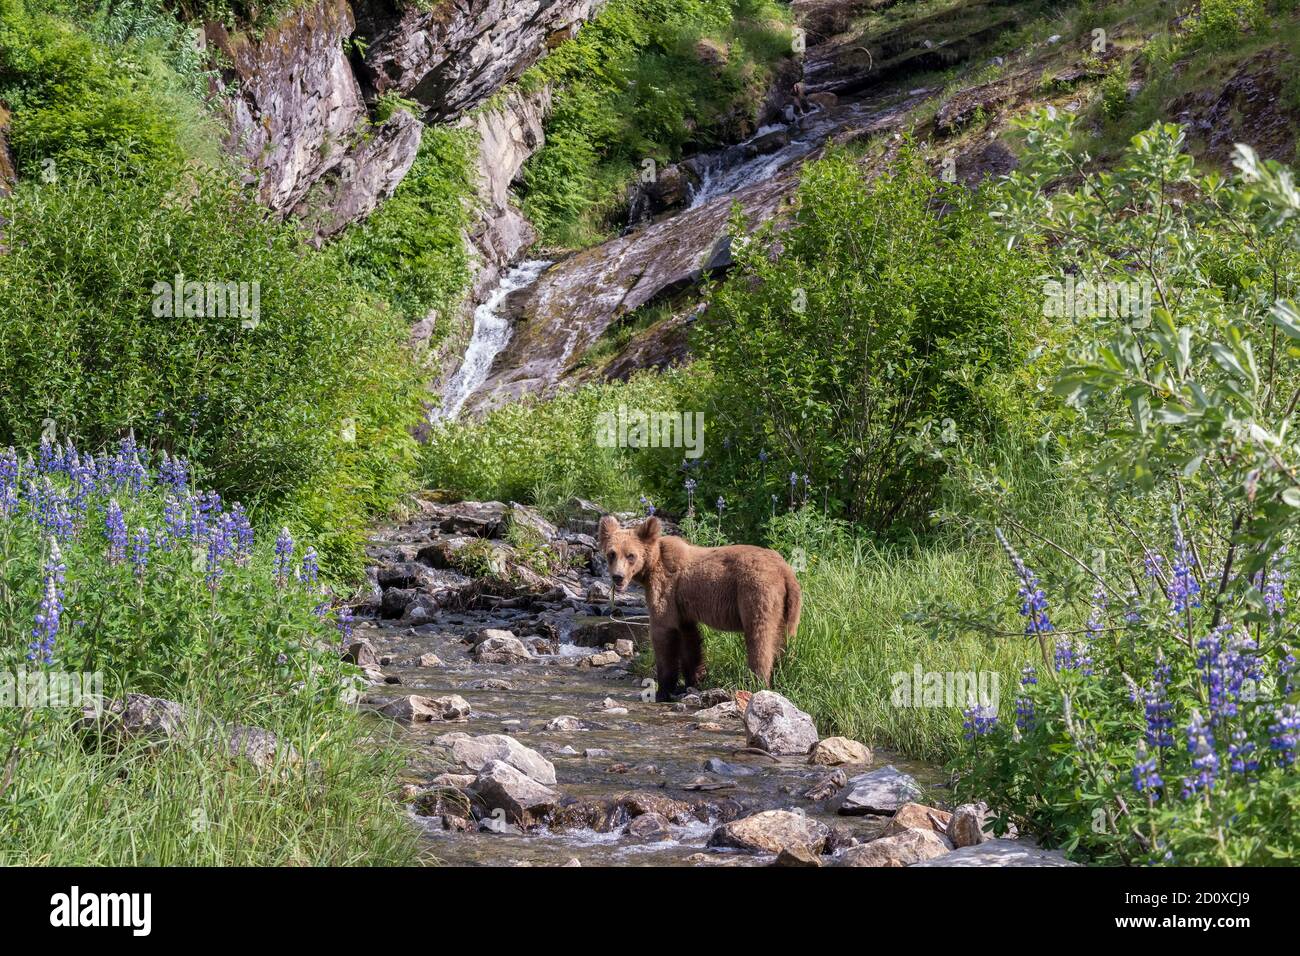 Young grizzly bear feeding by a waterfall and stream with lupines, Khutzeymateen, BC Stock Photo